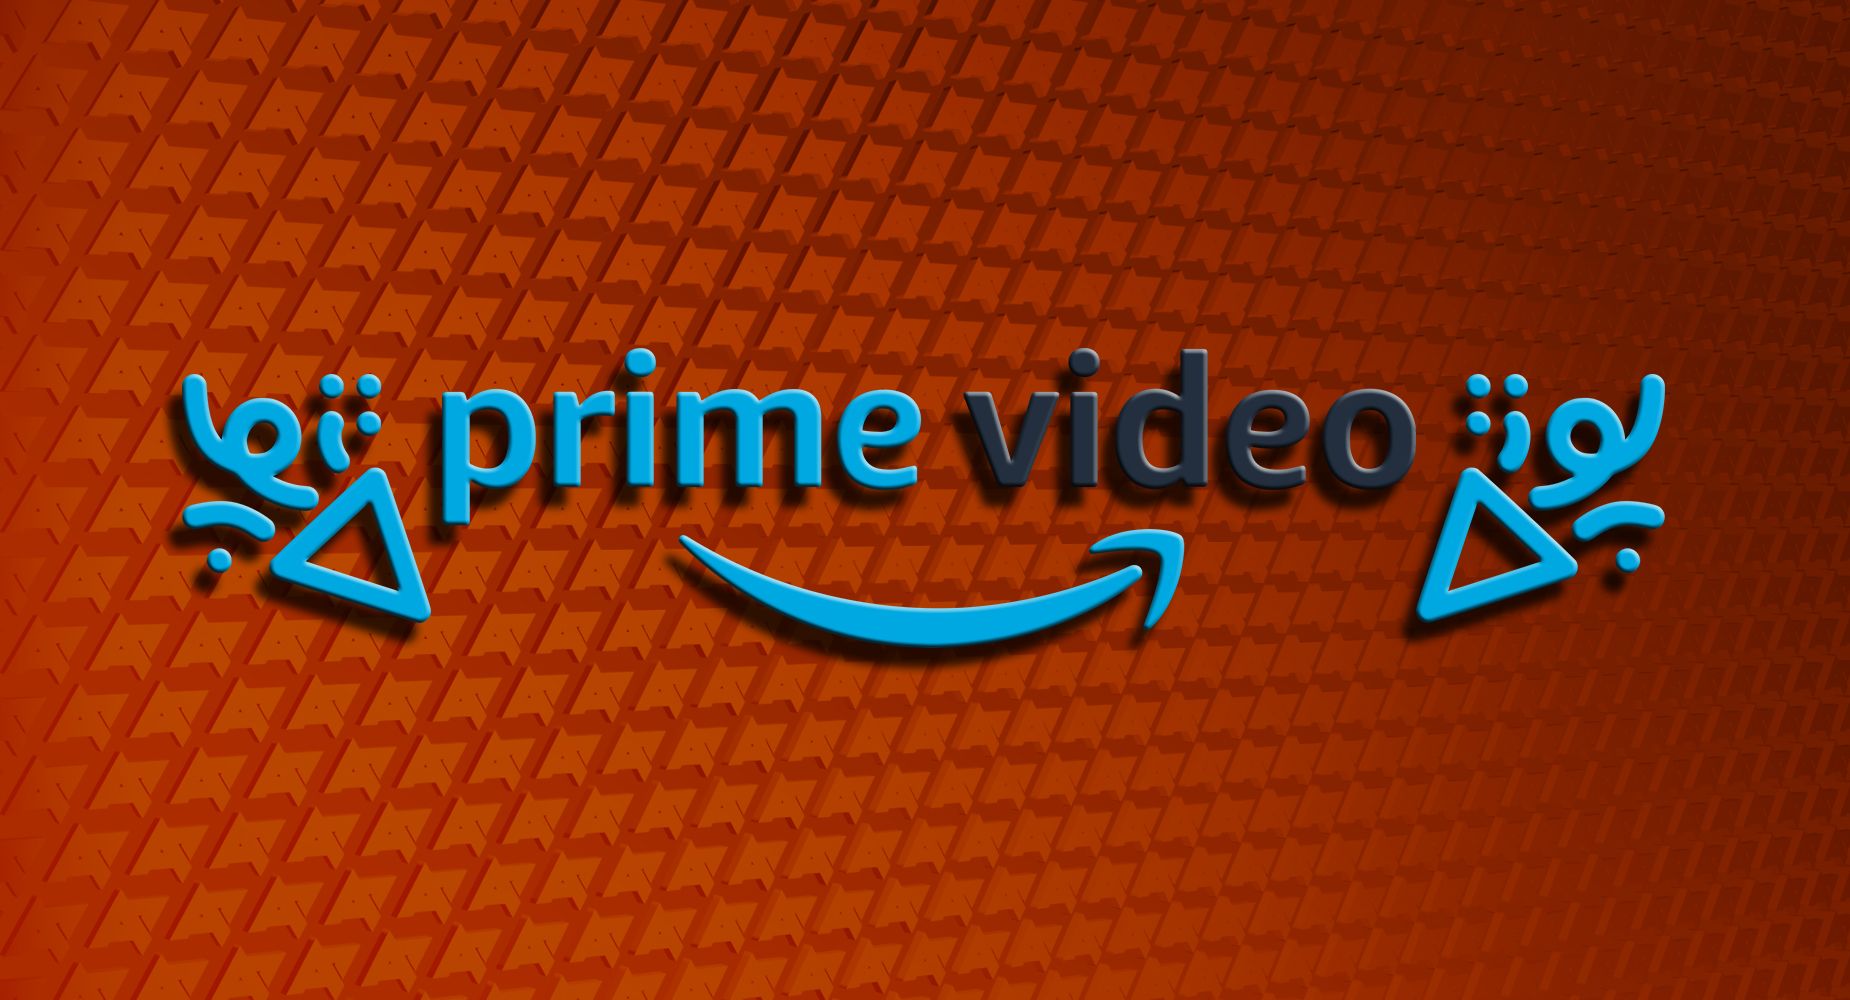 Amazon Prime Video logo flanked by Watch Party icons over an array of AP logos